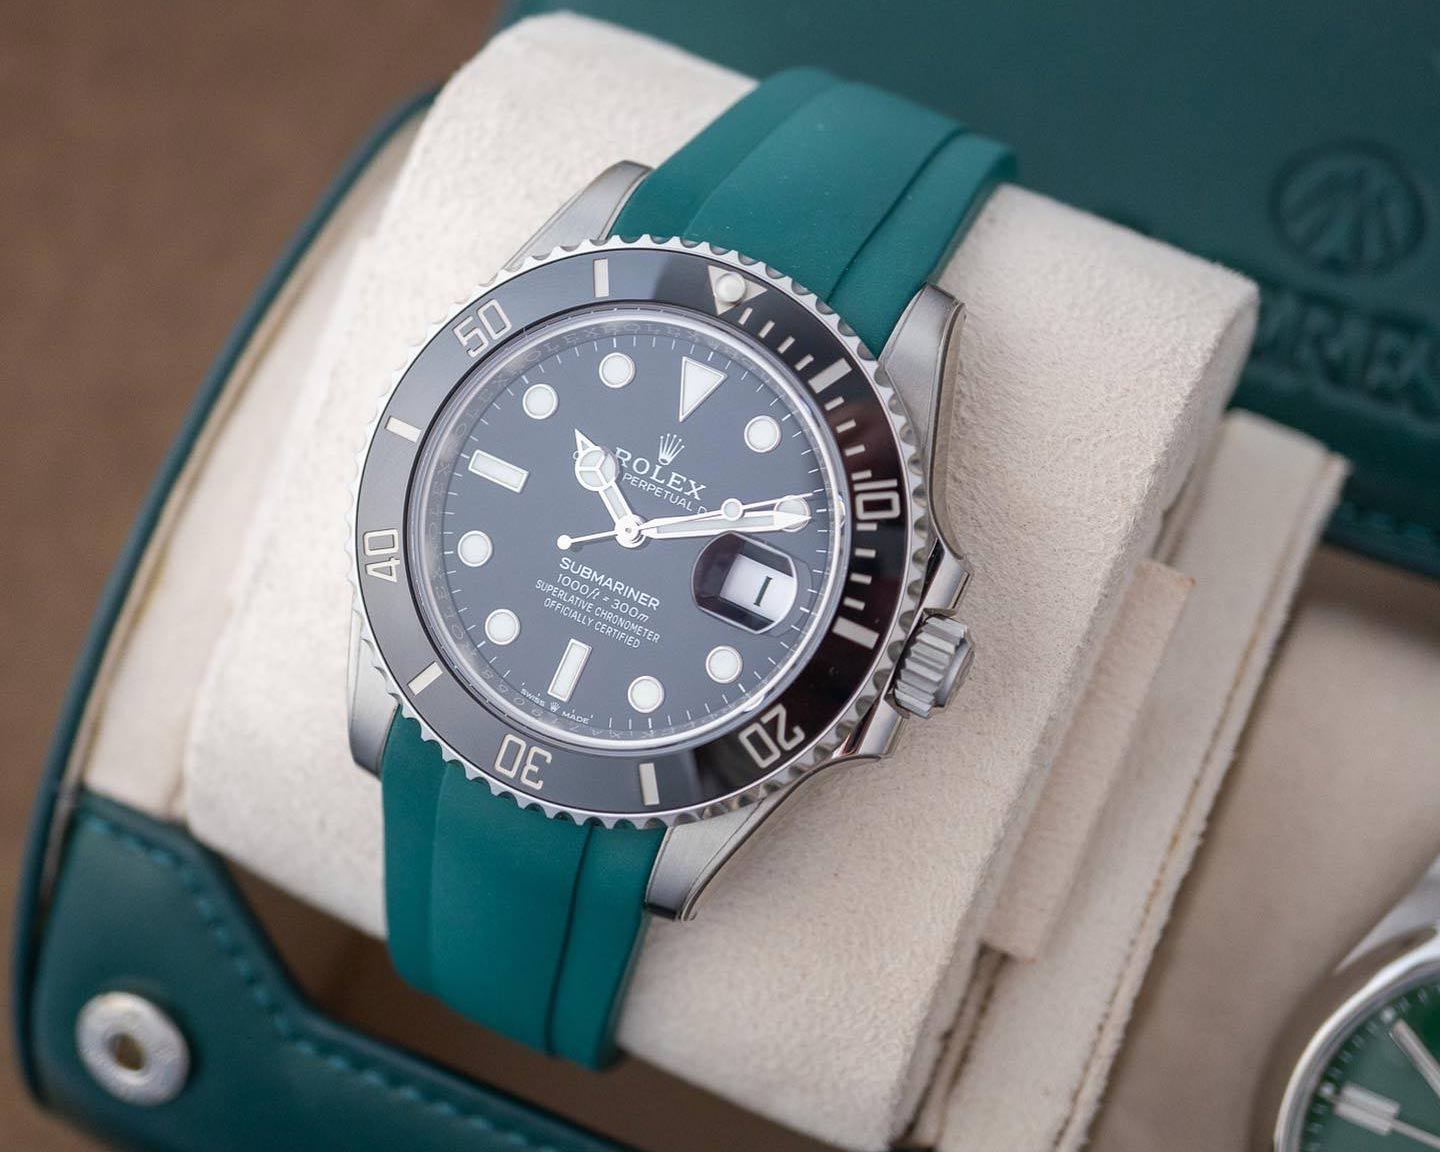 Rolex Submariner 41 Rubber Bands & Accessories - Everest Horology Products